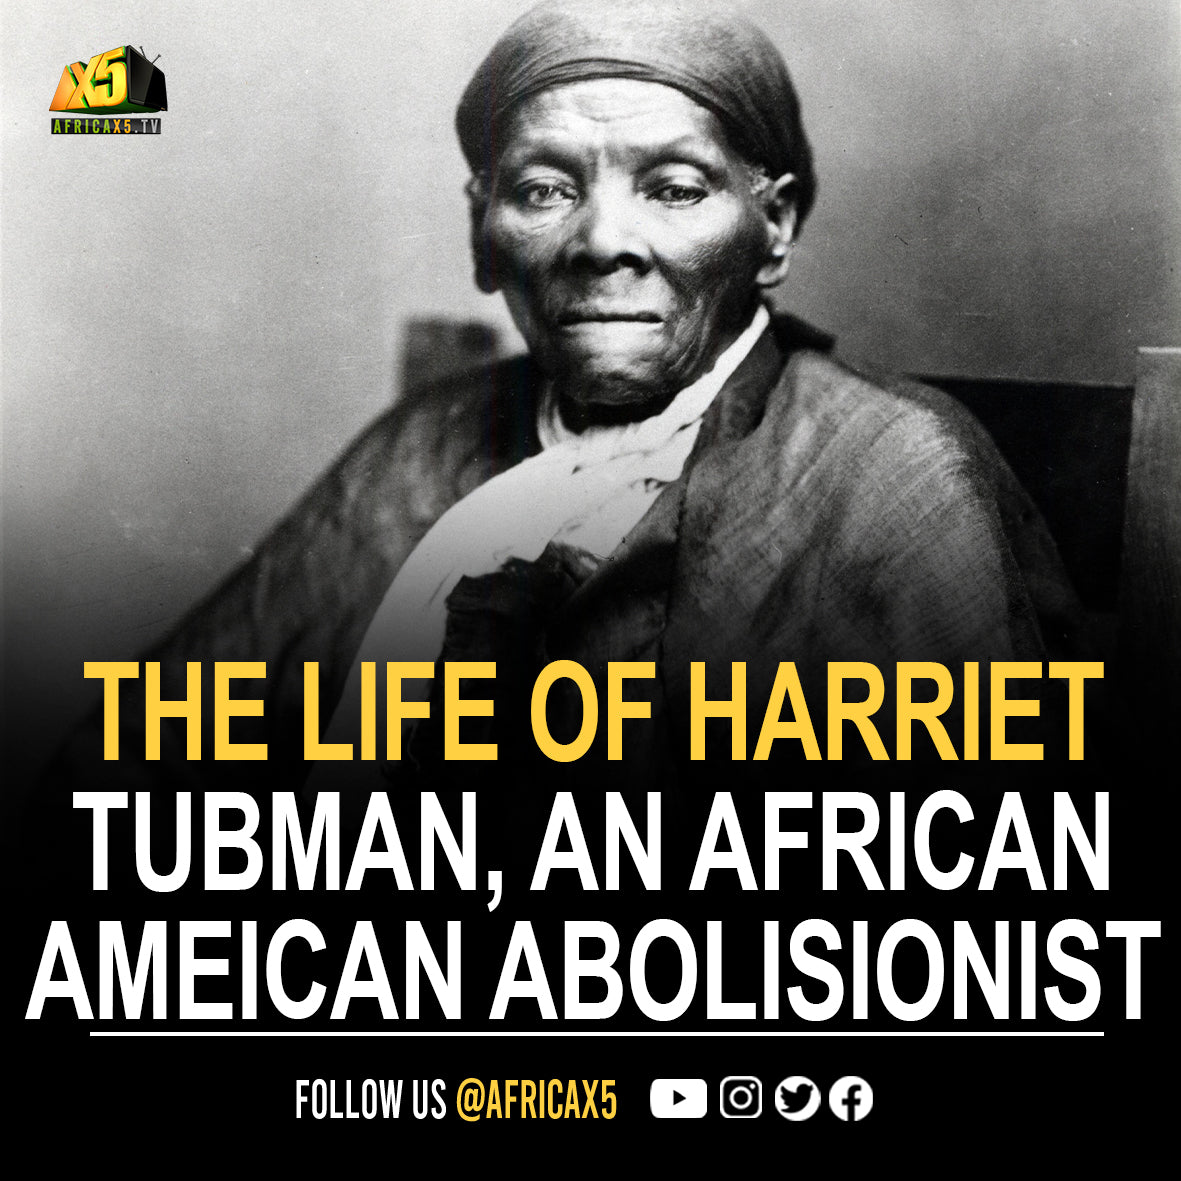 Harriet Tubman (born Araminta "Minty" Ross) was an African-American abolitionist, humanitarian, and Union spy during the American Civil War.